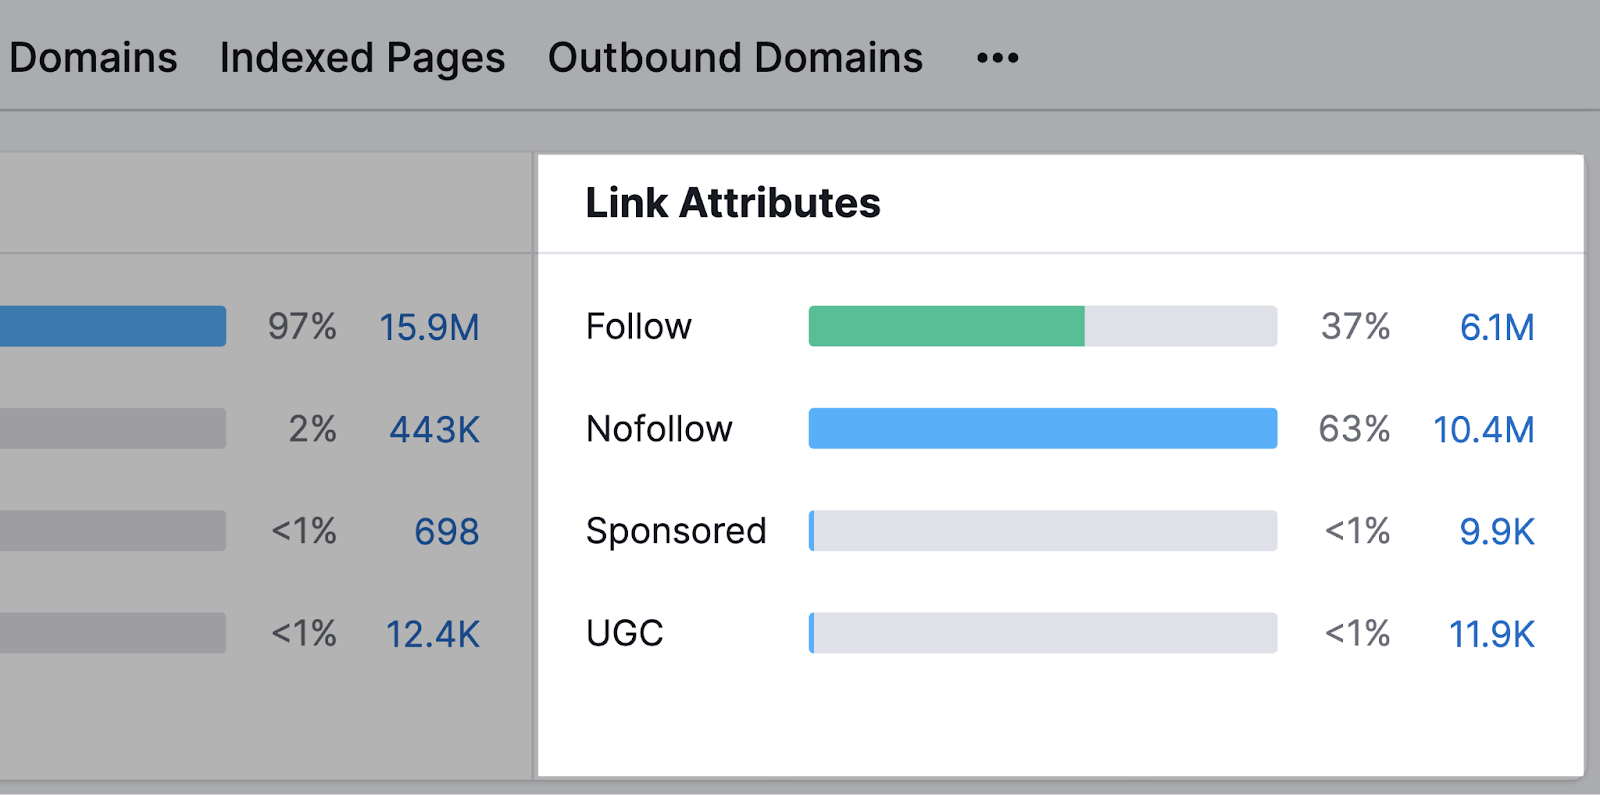 "Link Attributes" section shows a breakdown for follow, nofollow, sponsored and ugc links